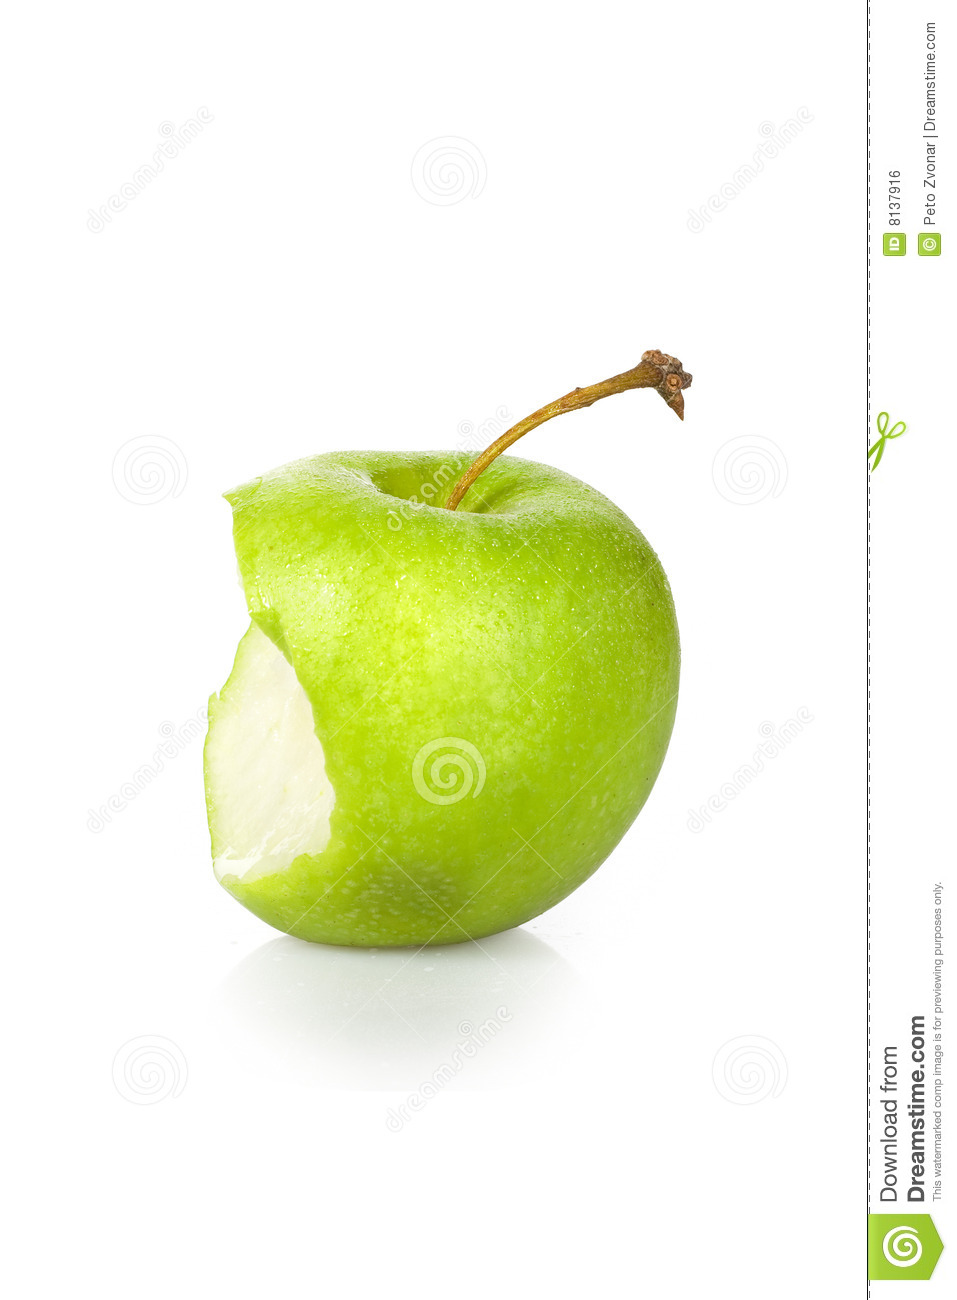 Green Apple Core Royalty Free Stock Image   Image  8137916